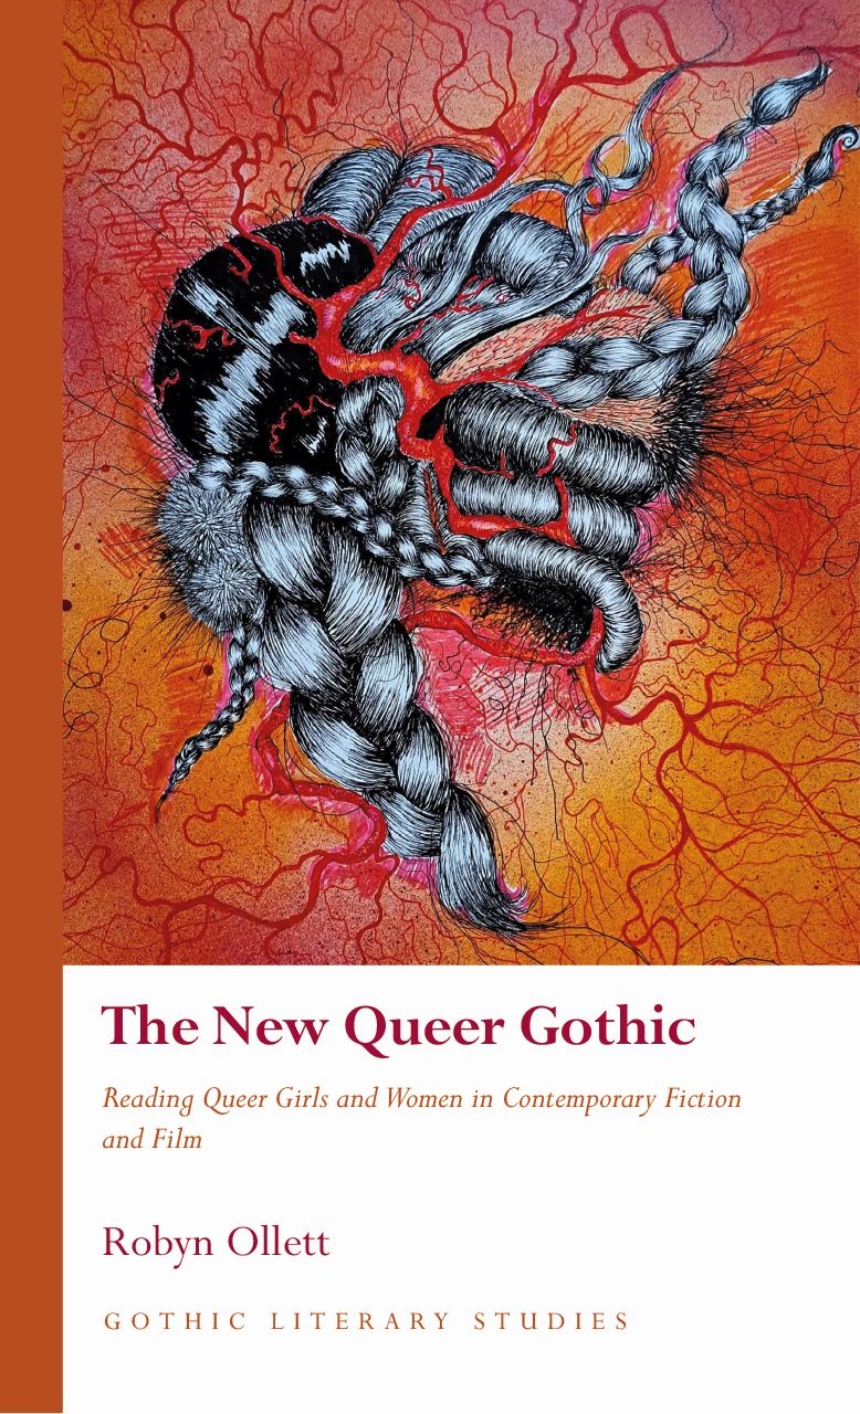 The New Queer Gothic